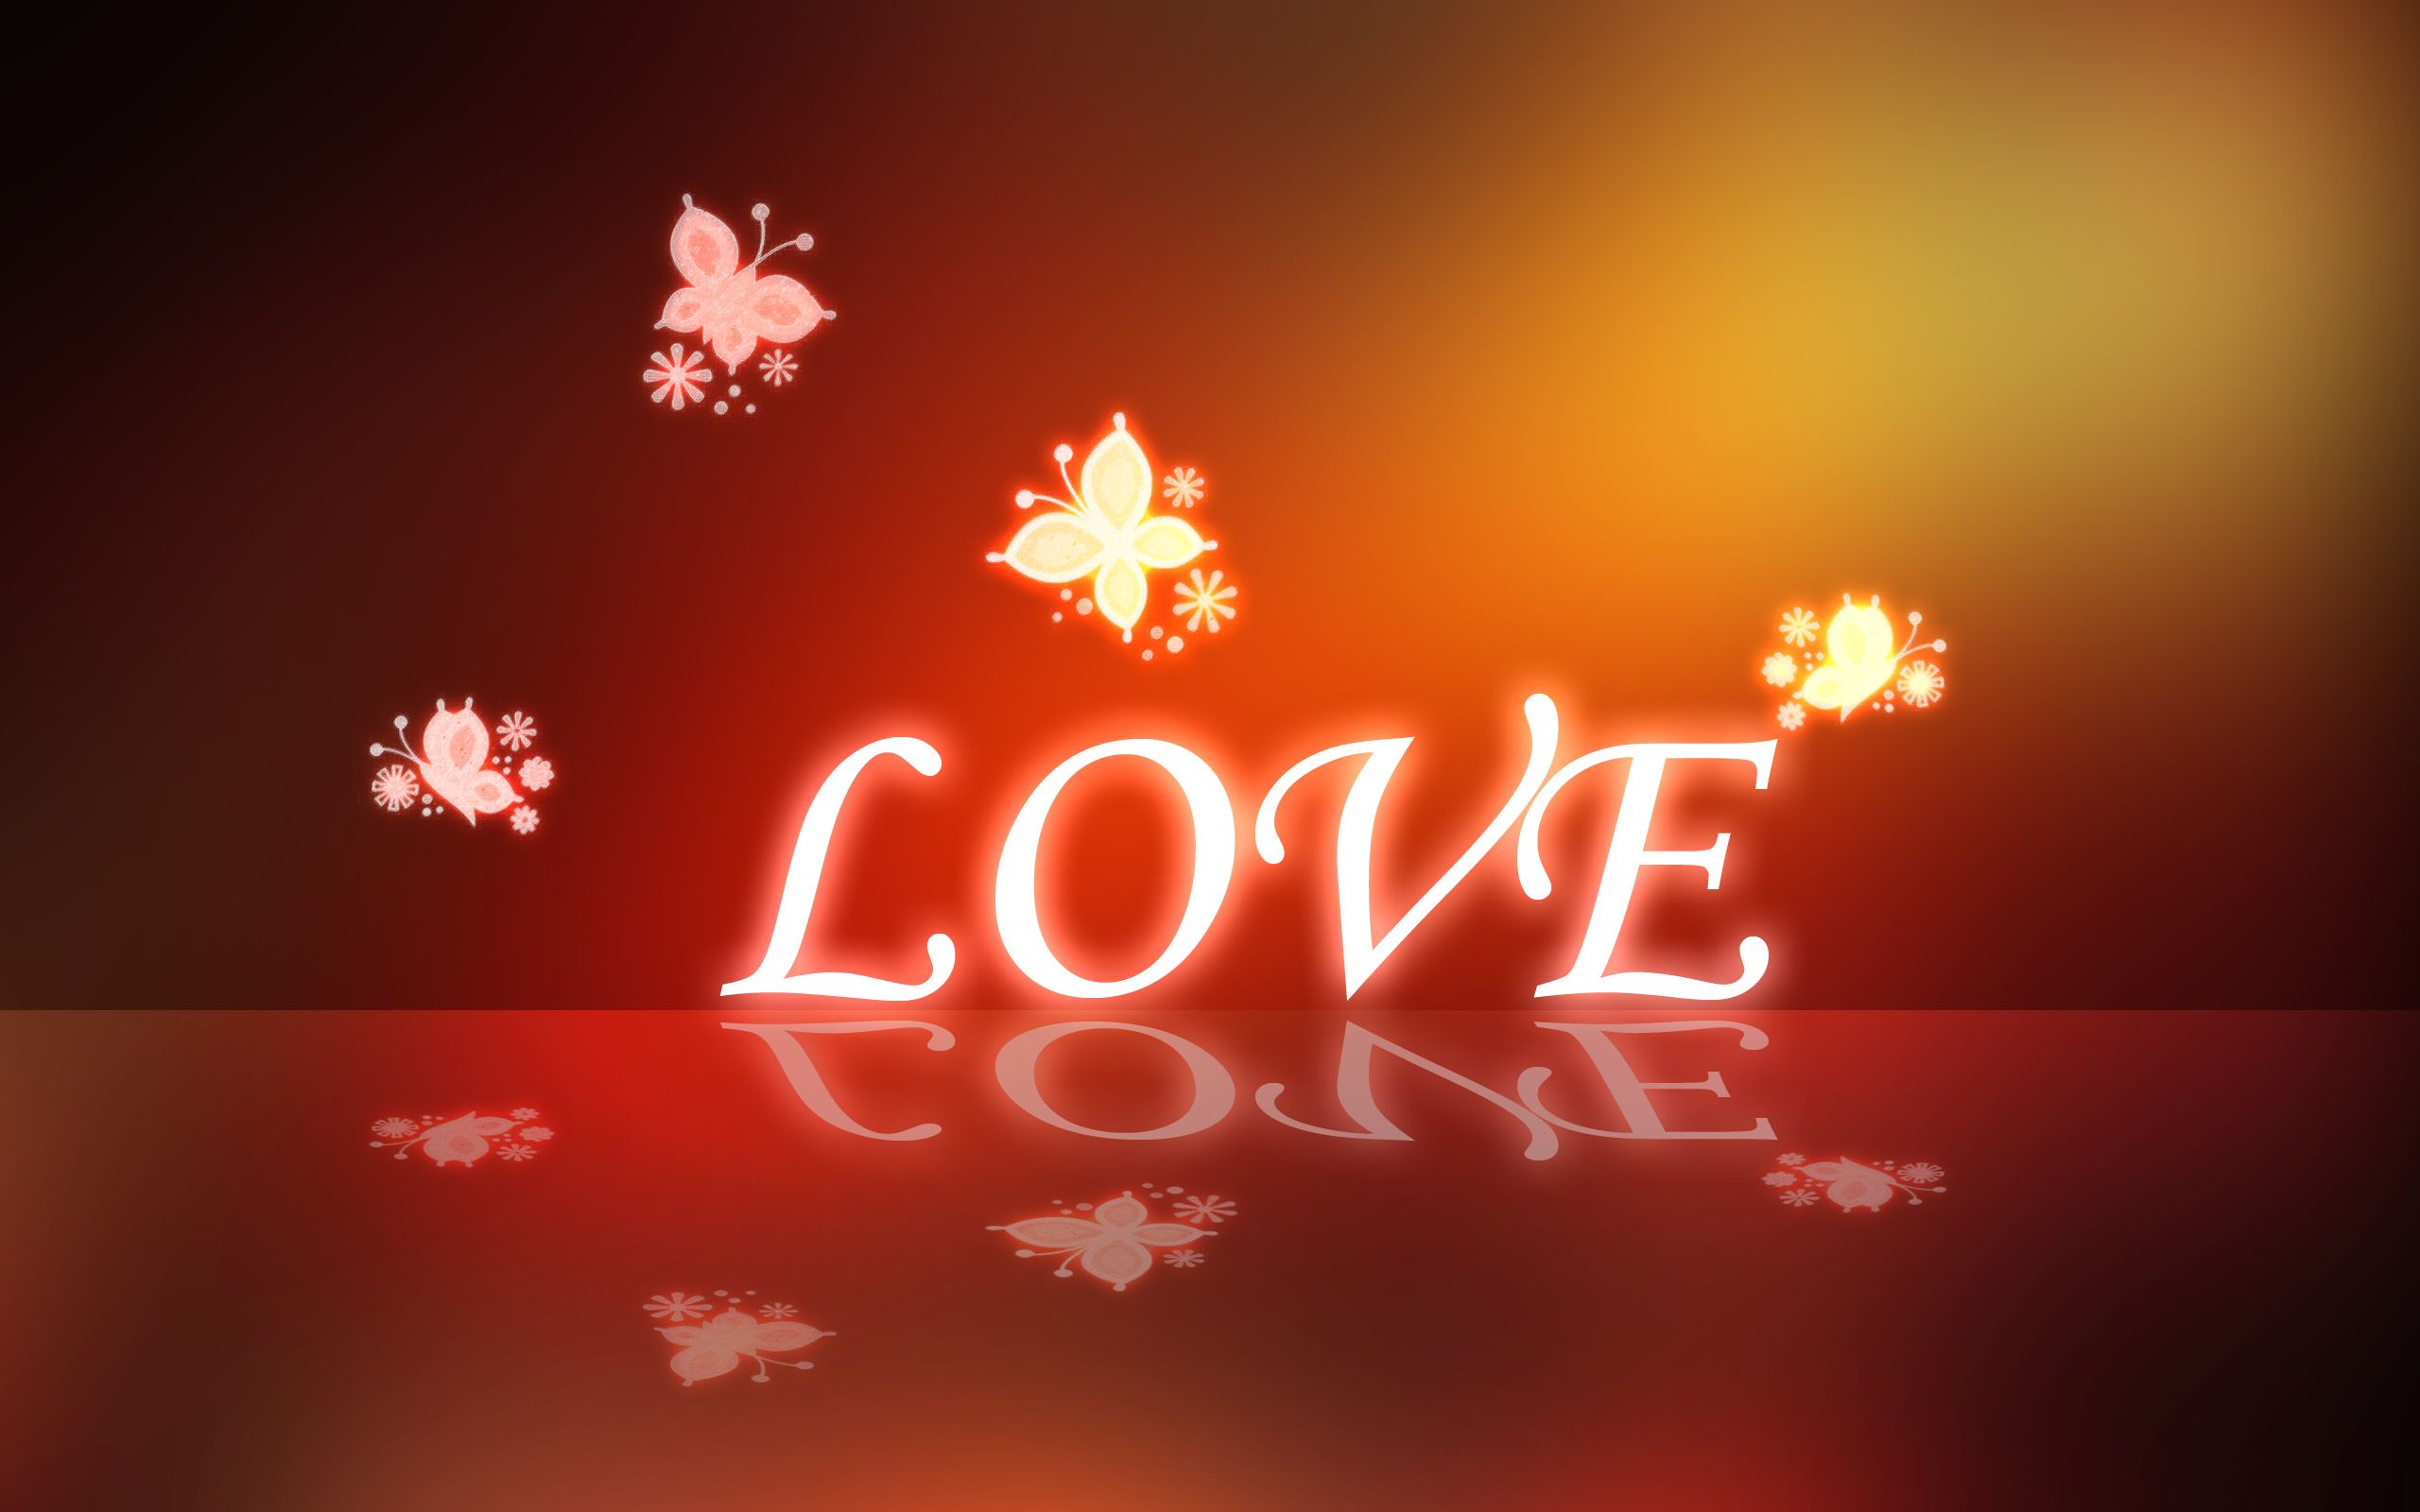 Top Name Cover - Love Name Photo Download - 2560x1600 Wallpaper 